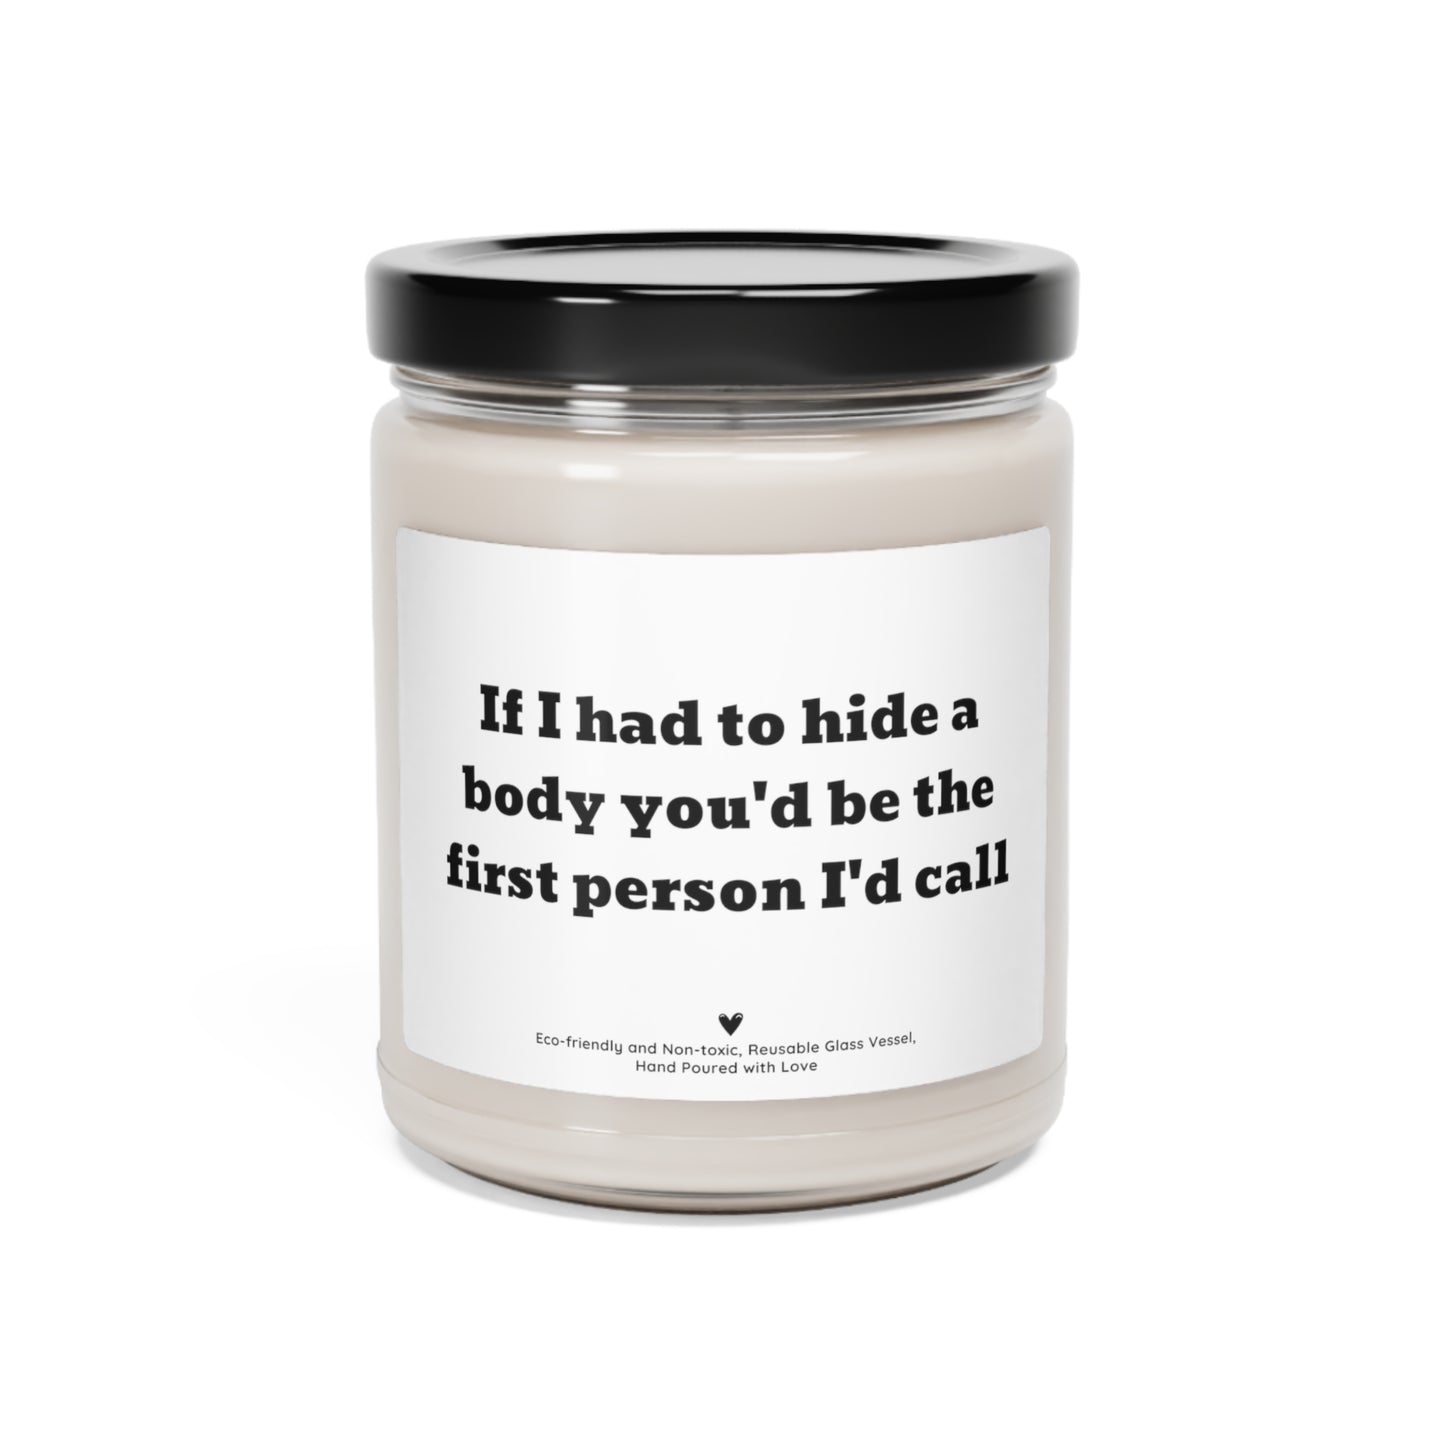 6.Scented Soy Candle, 9oz